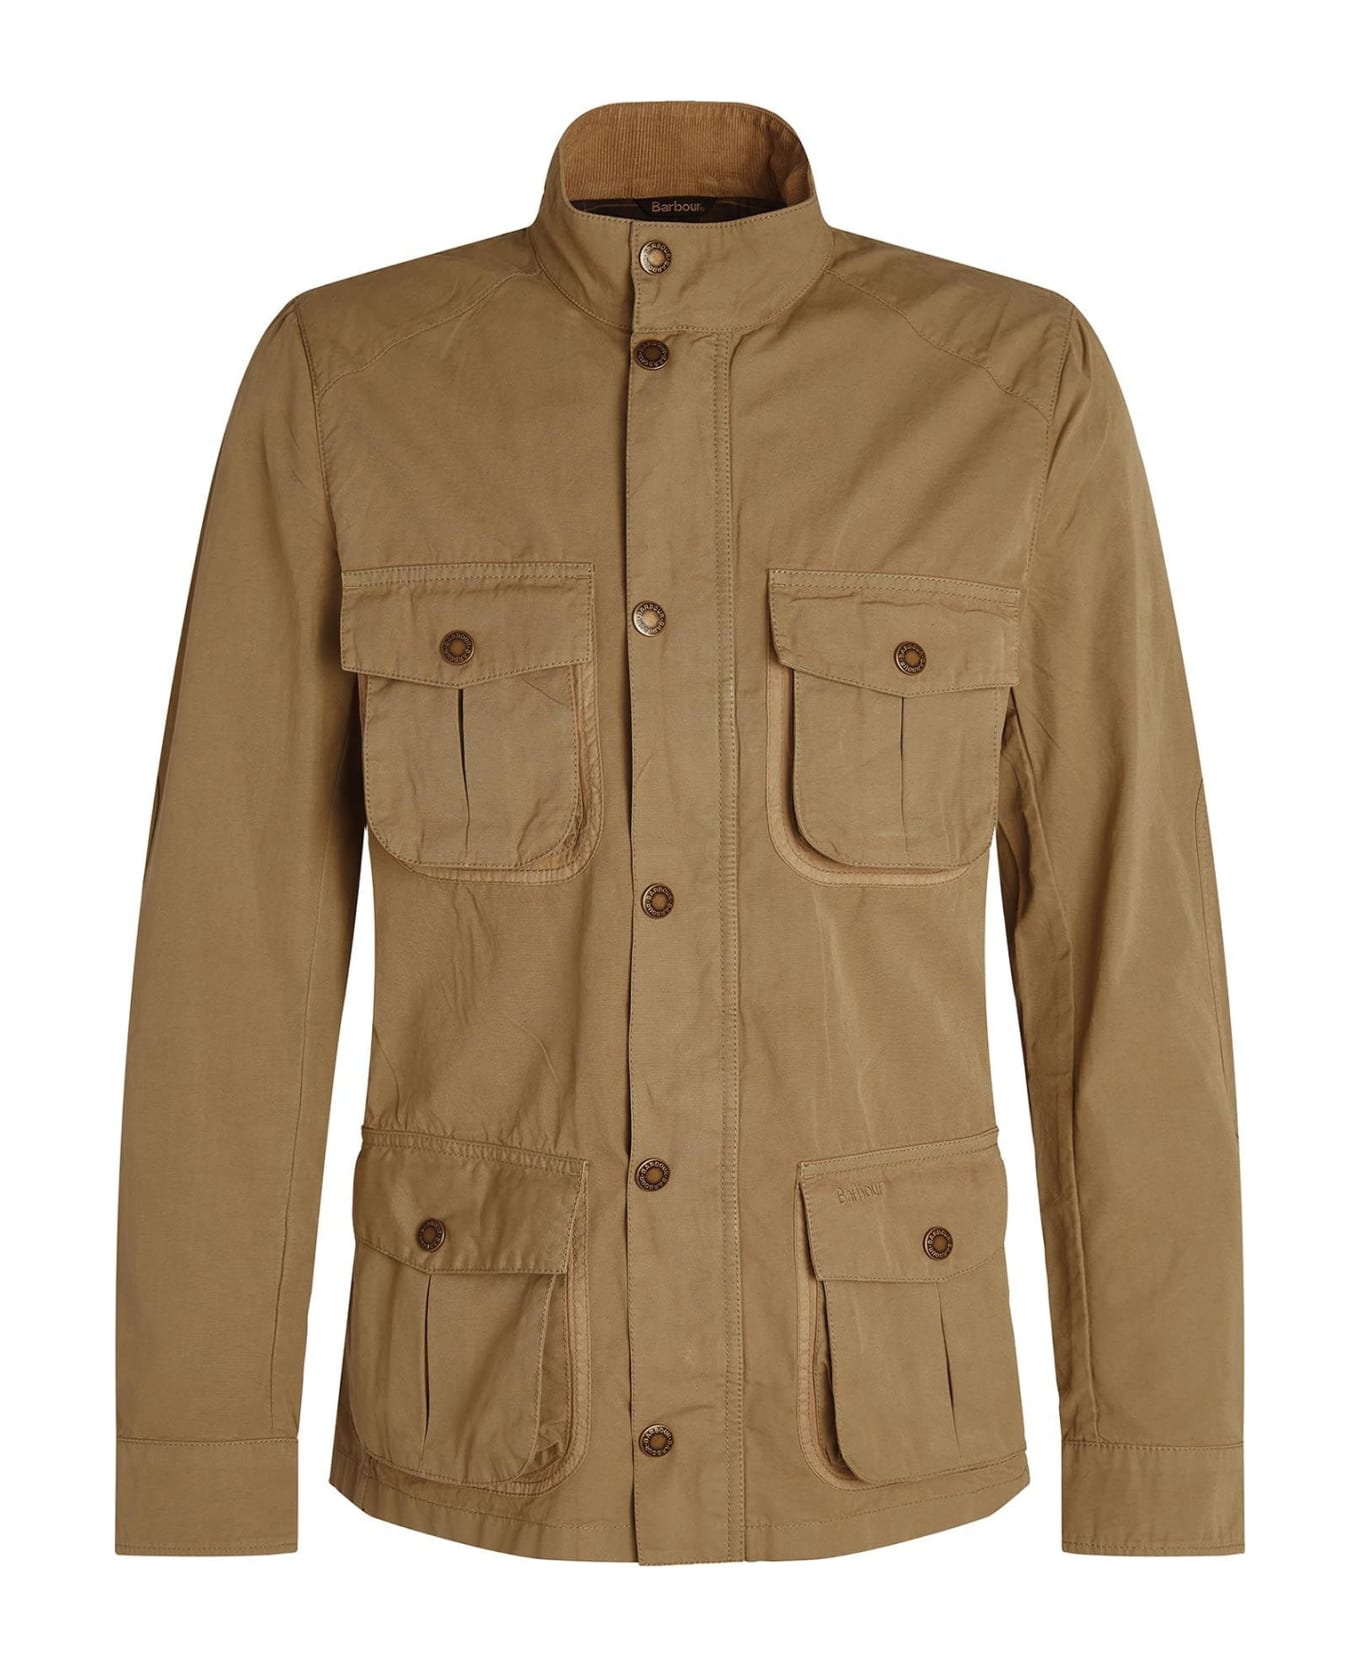 Barbour Jacket With Buttons And Pockets - BLEACHED OLIVE ジャケット